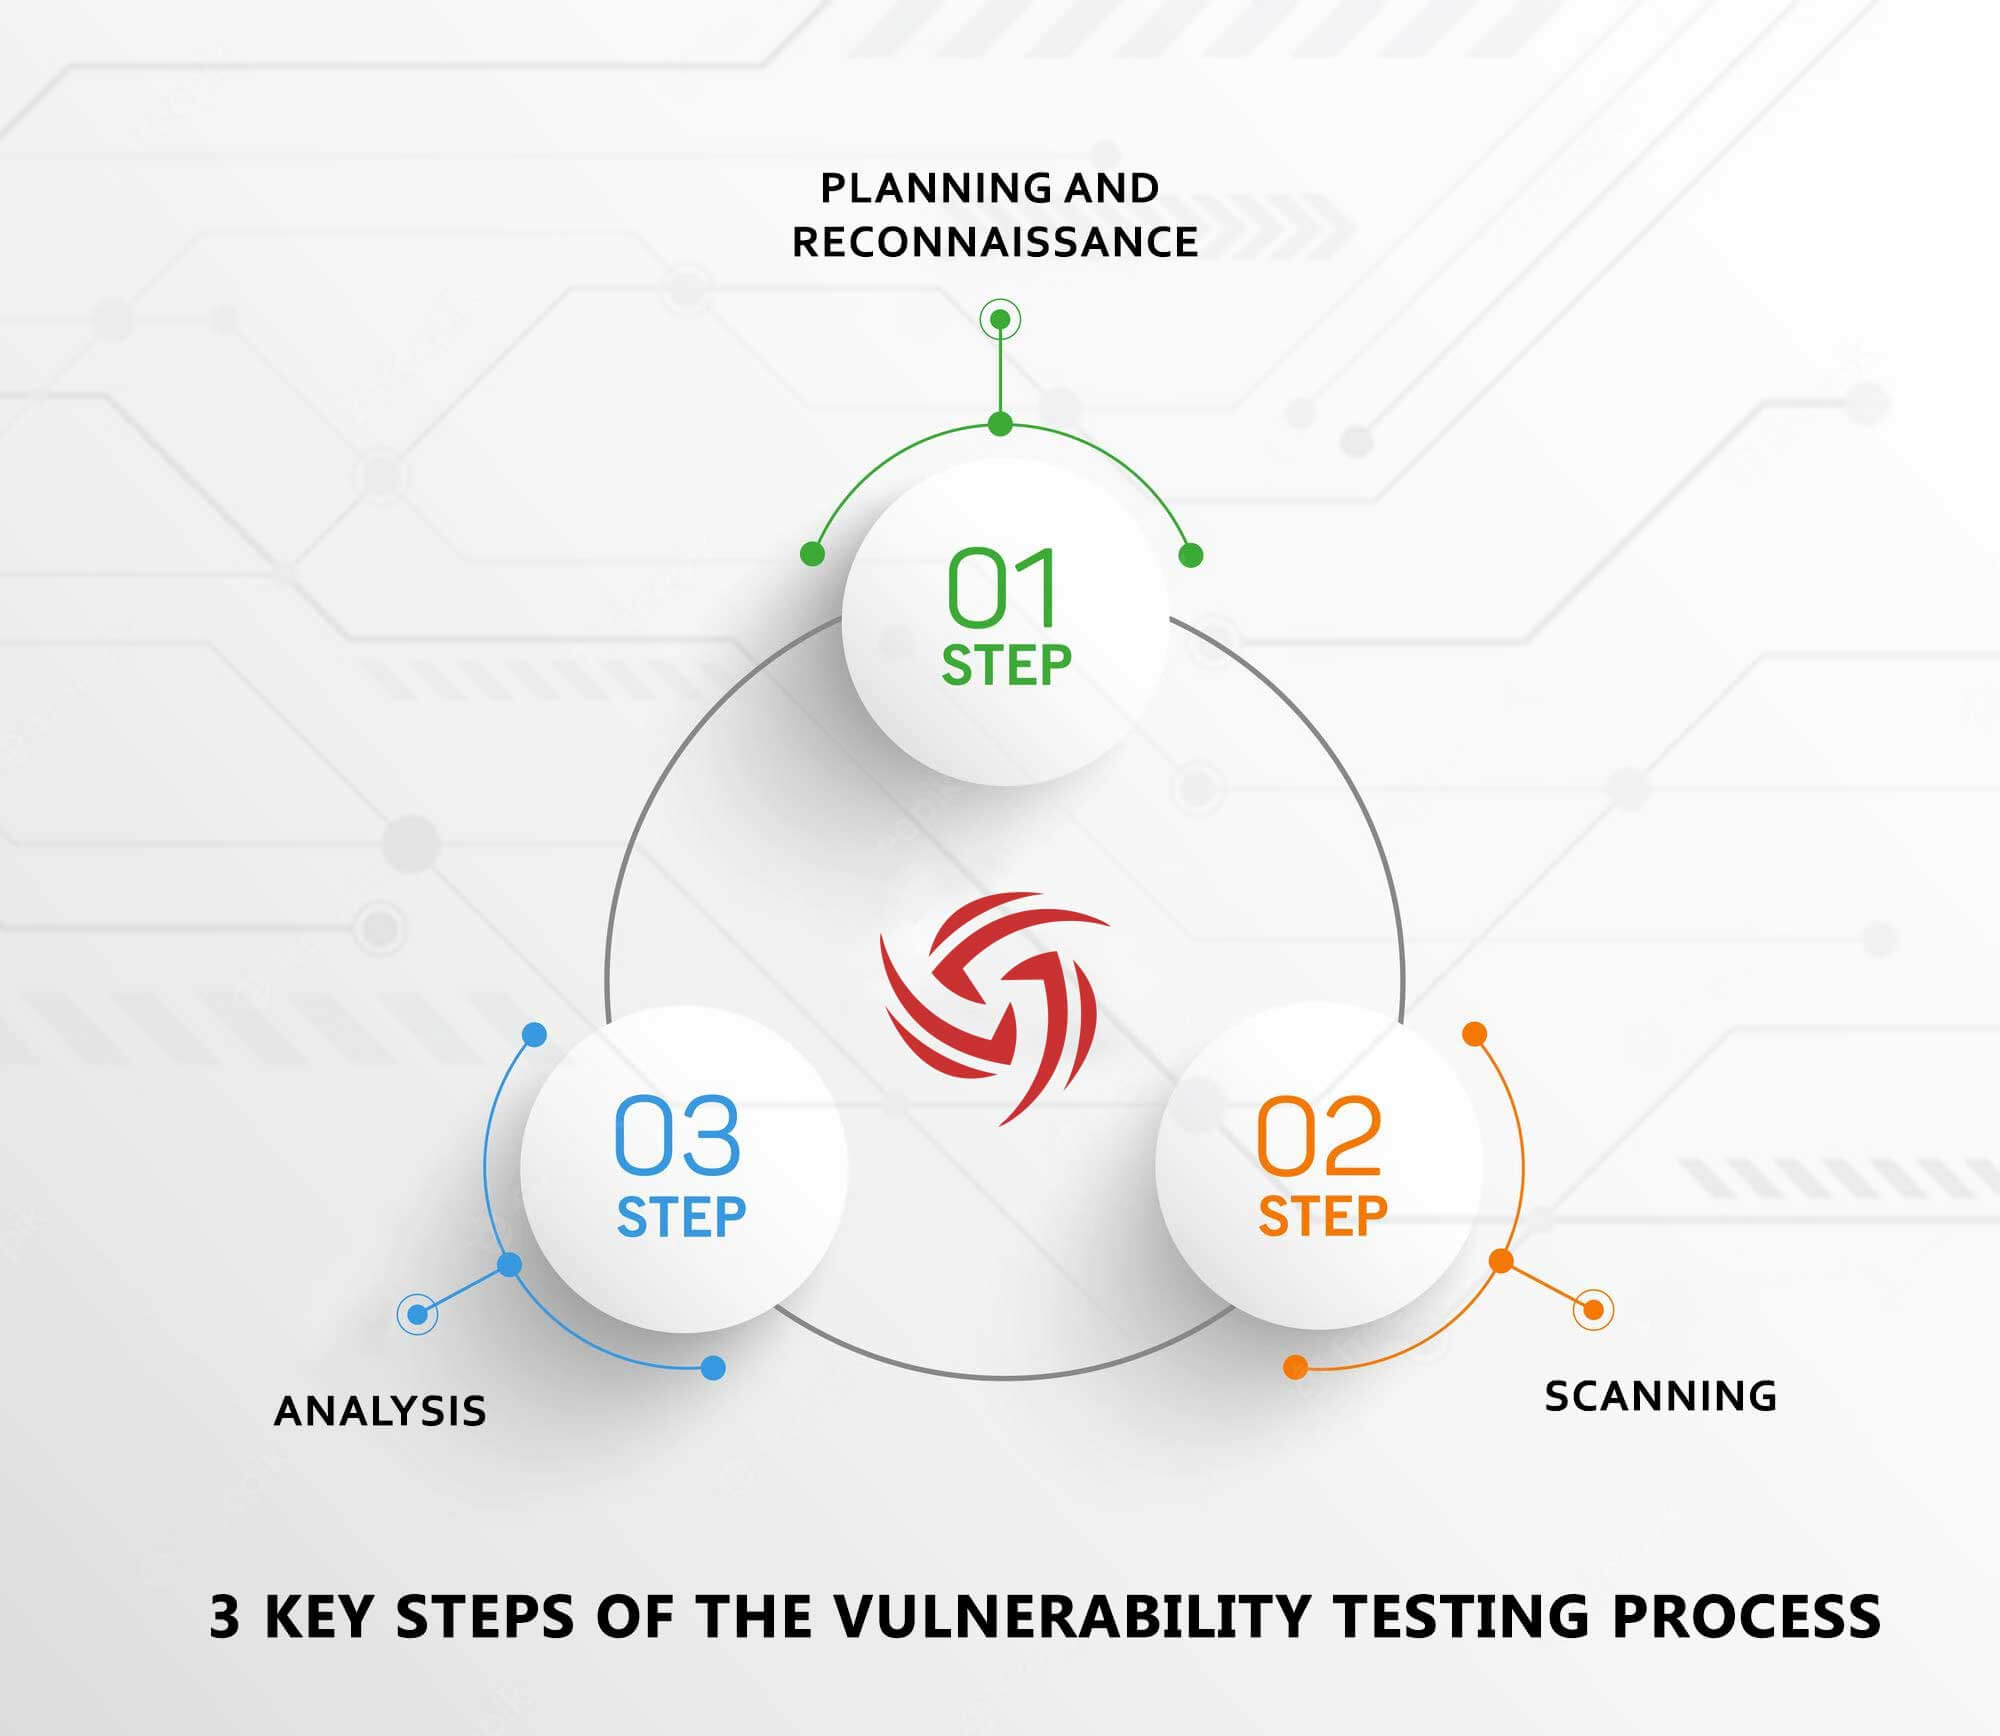 Three key steps of the vulnerability testing process that companies must follow